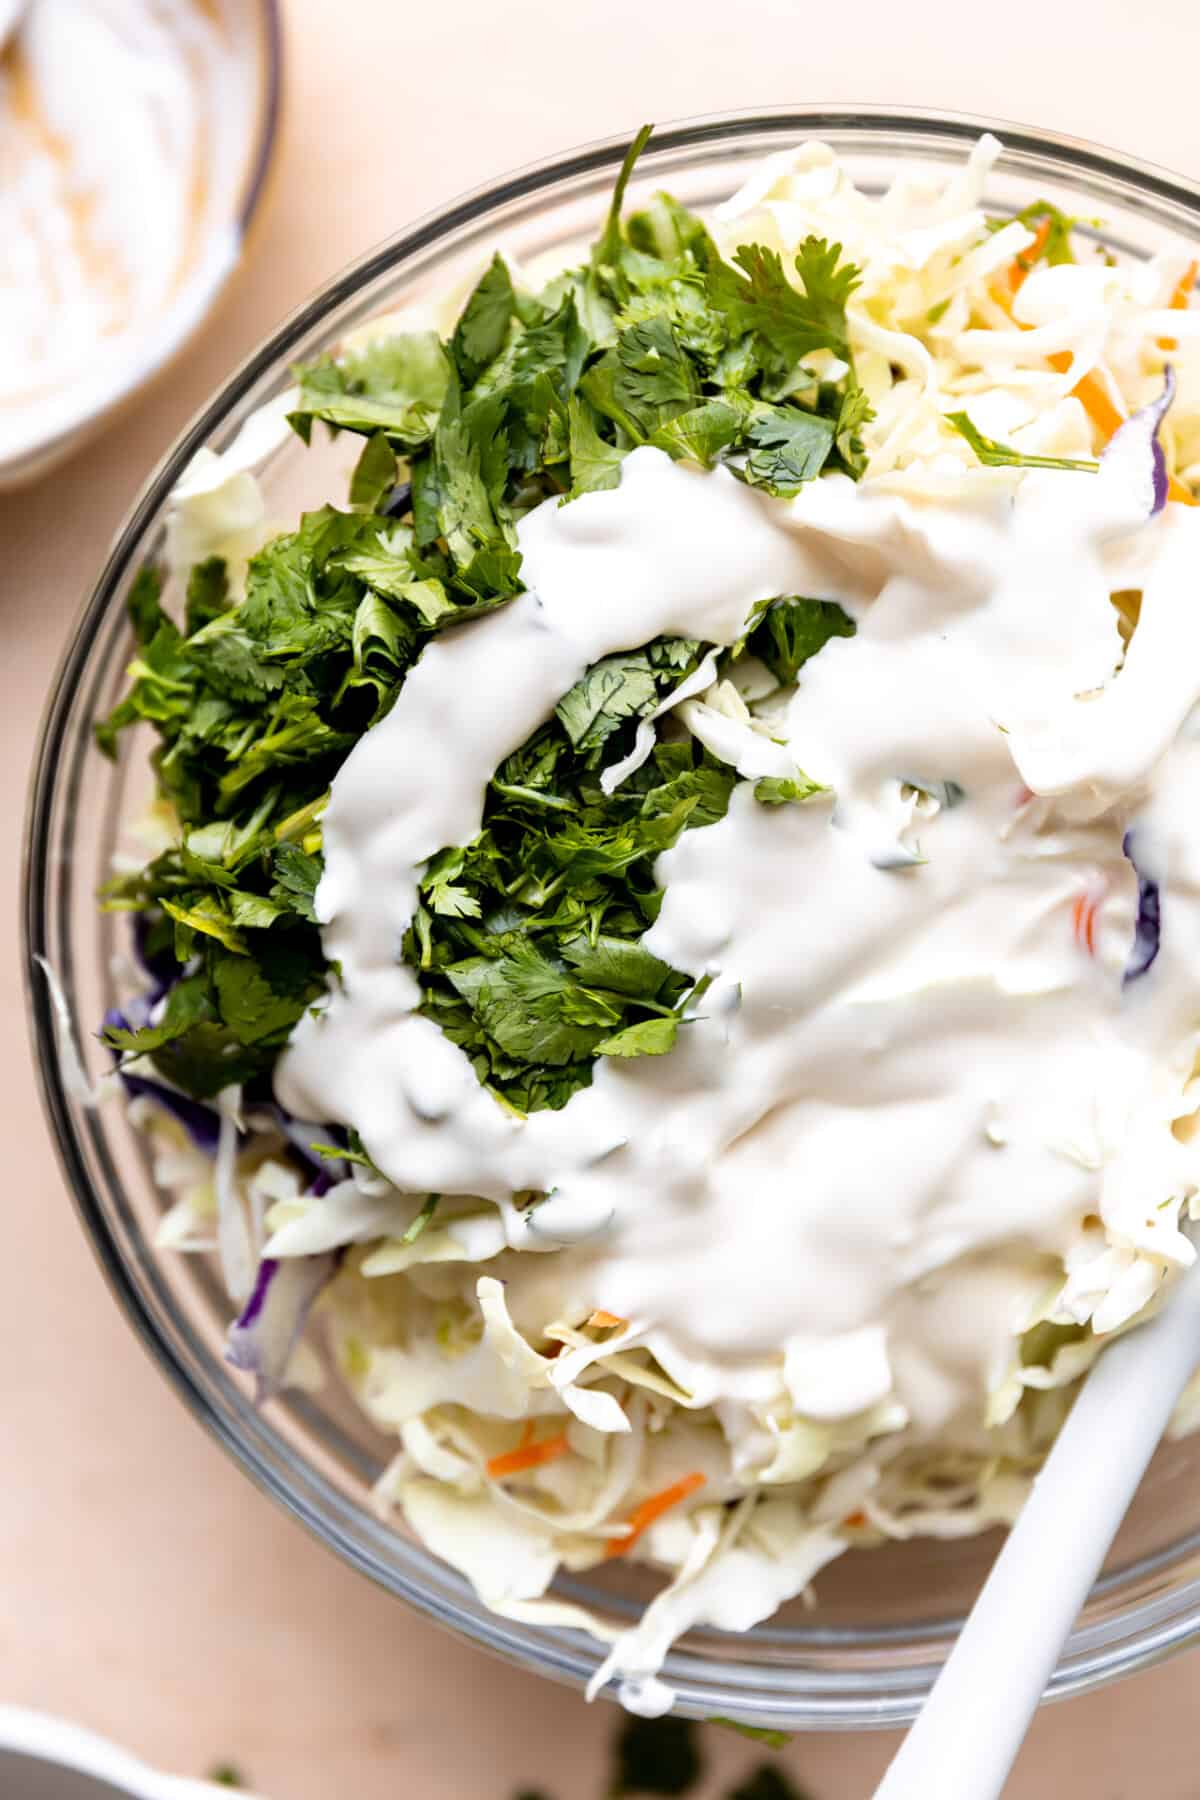 Cabbage slaw drizzled with a homemade coleslaw dressing.